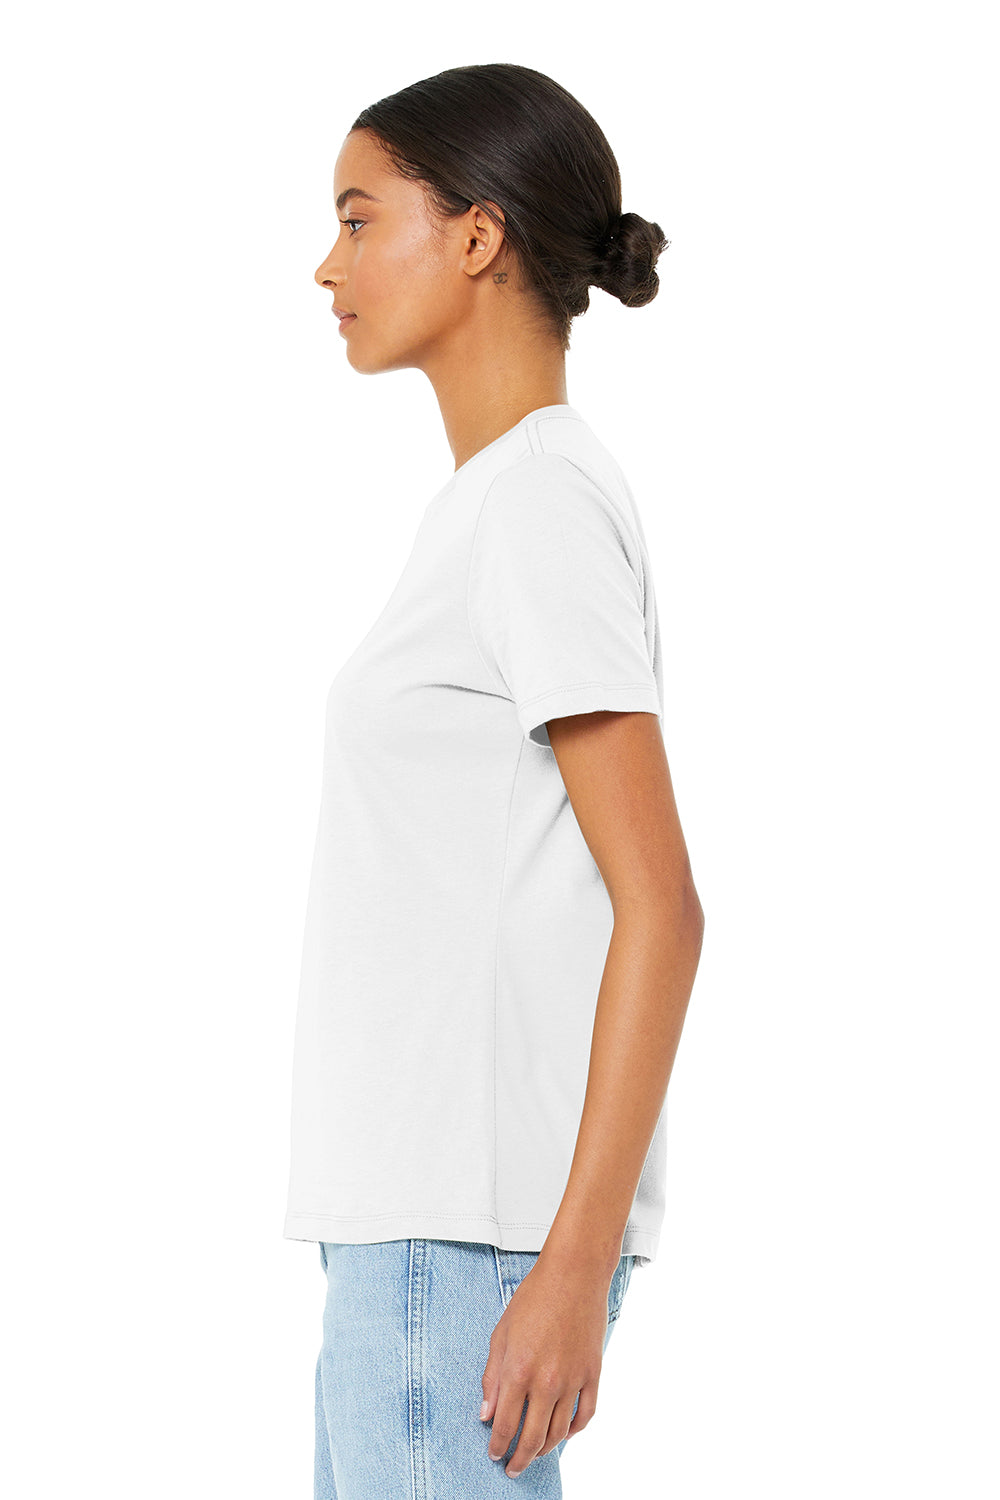 Bella + Canvas BC6400/B6400/6400 Womens Relaxed Jersey Short Sleeve Crewneck T-Shirt White Model Side